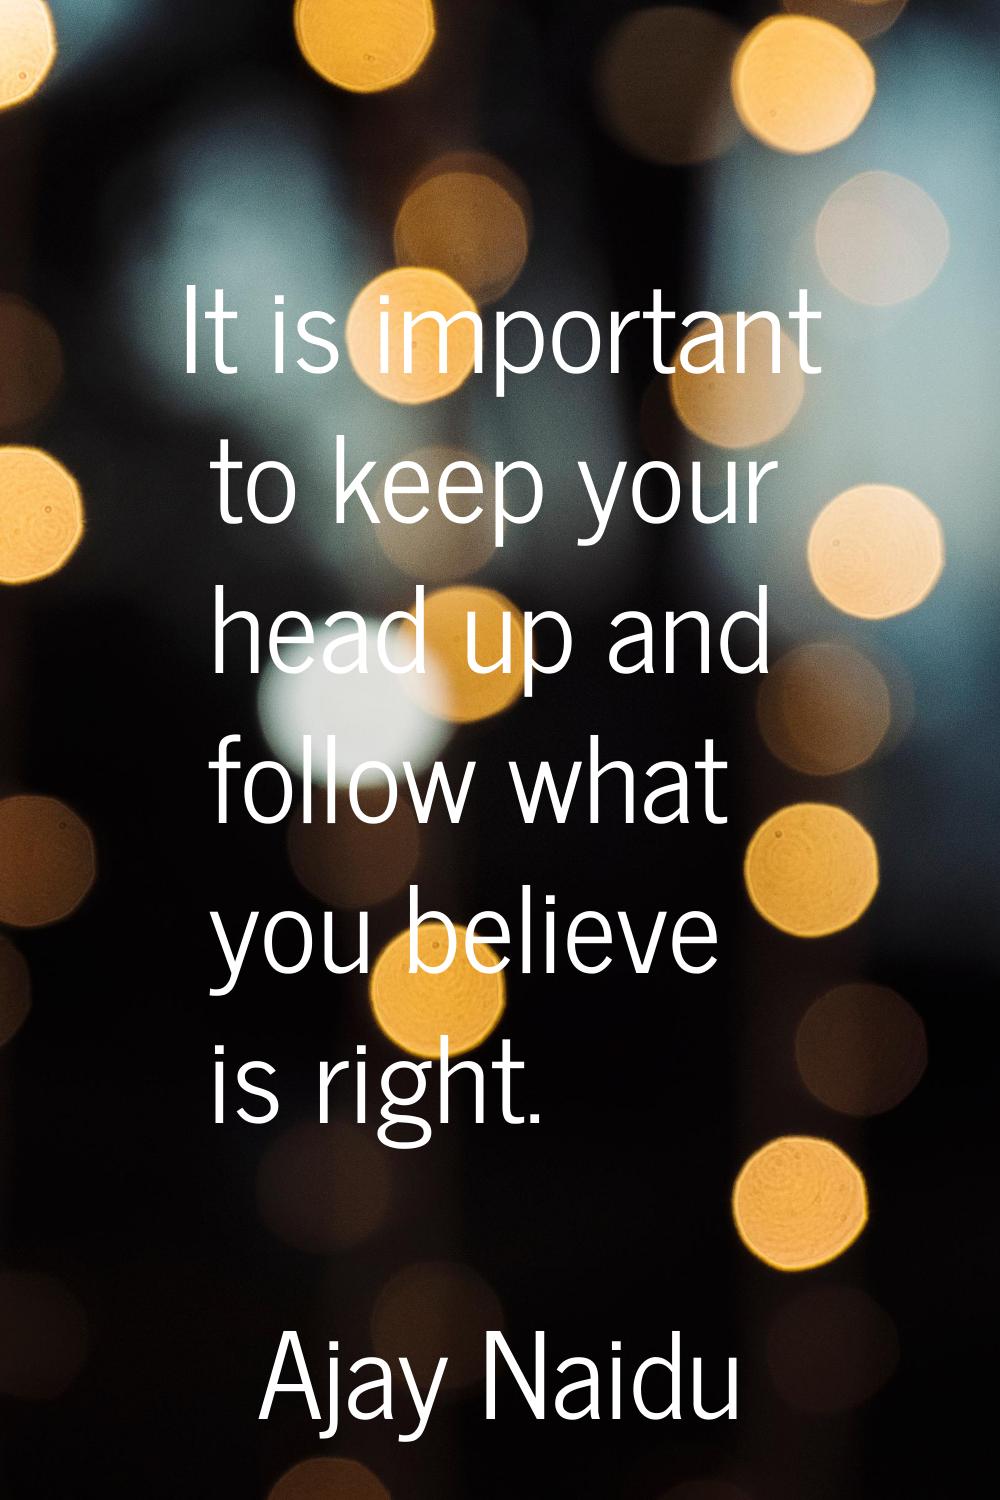 It is important to keep your head up and follow what you believe is right.